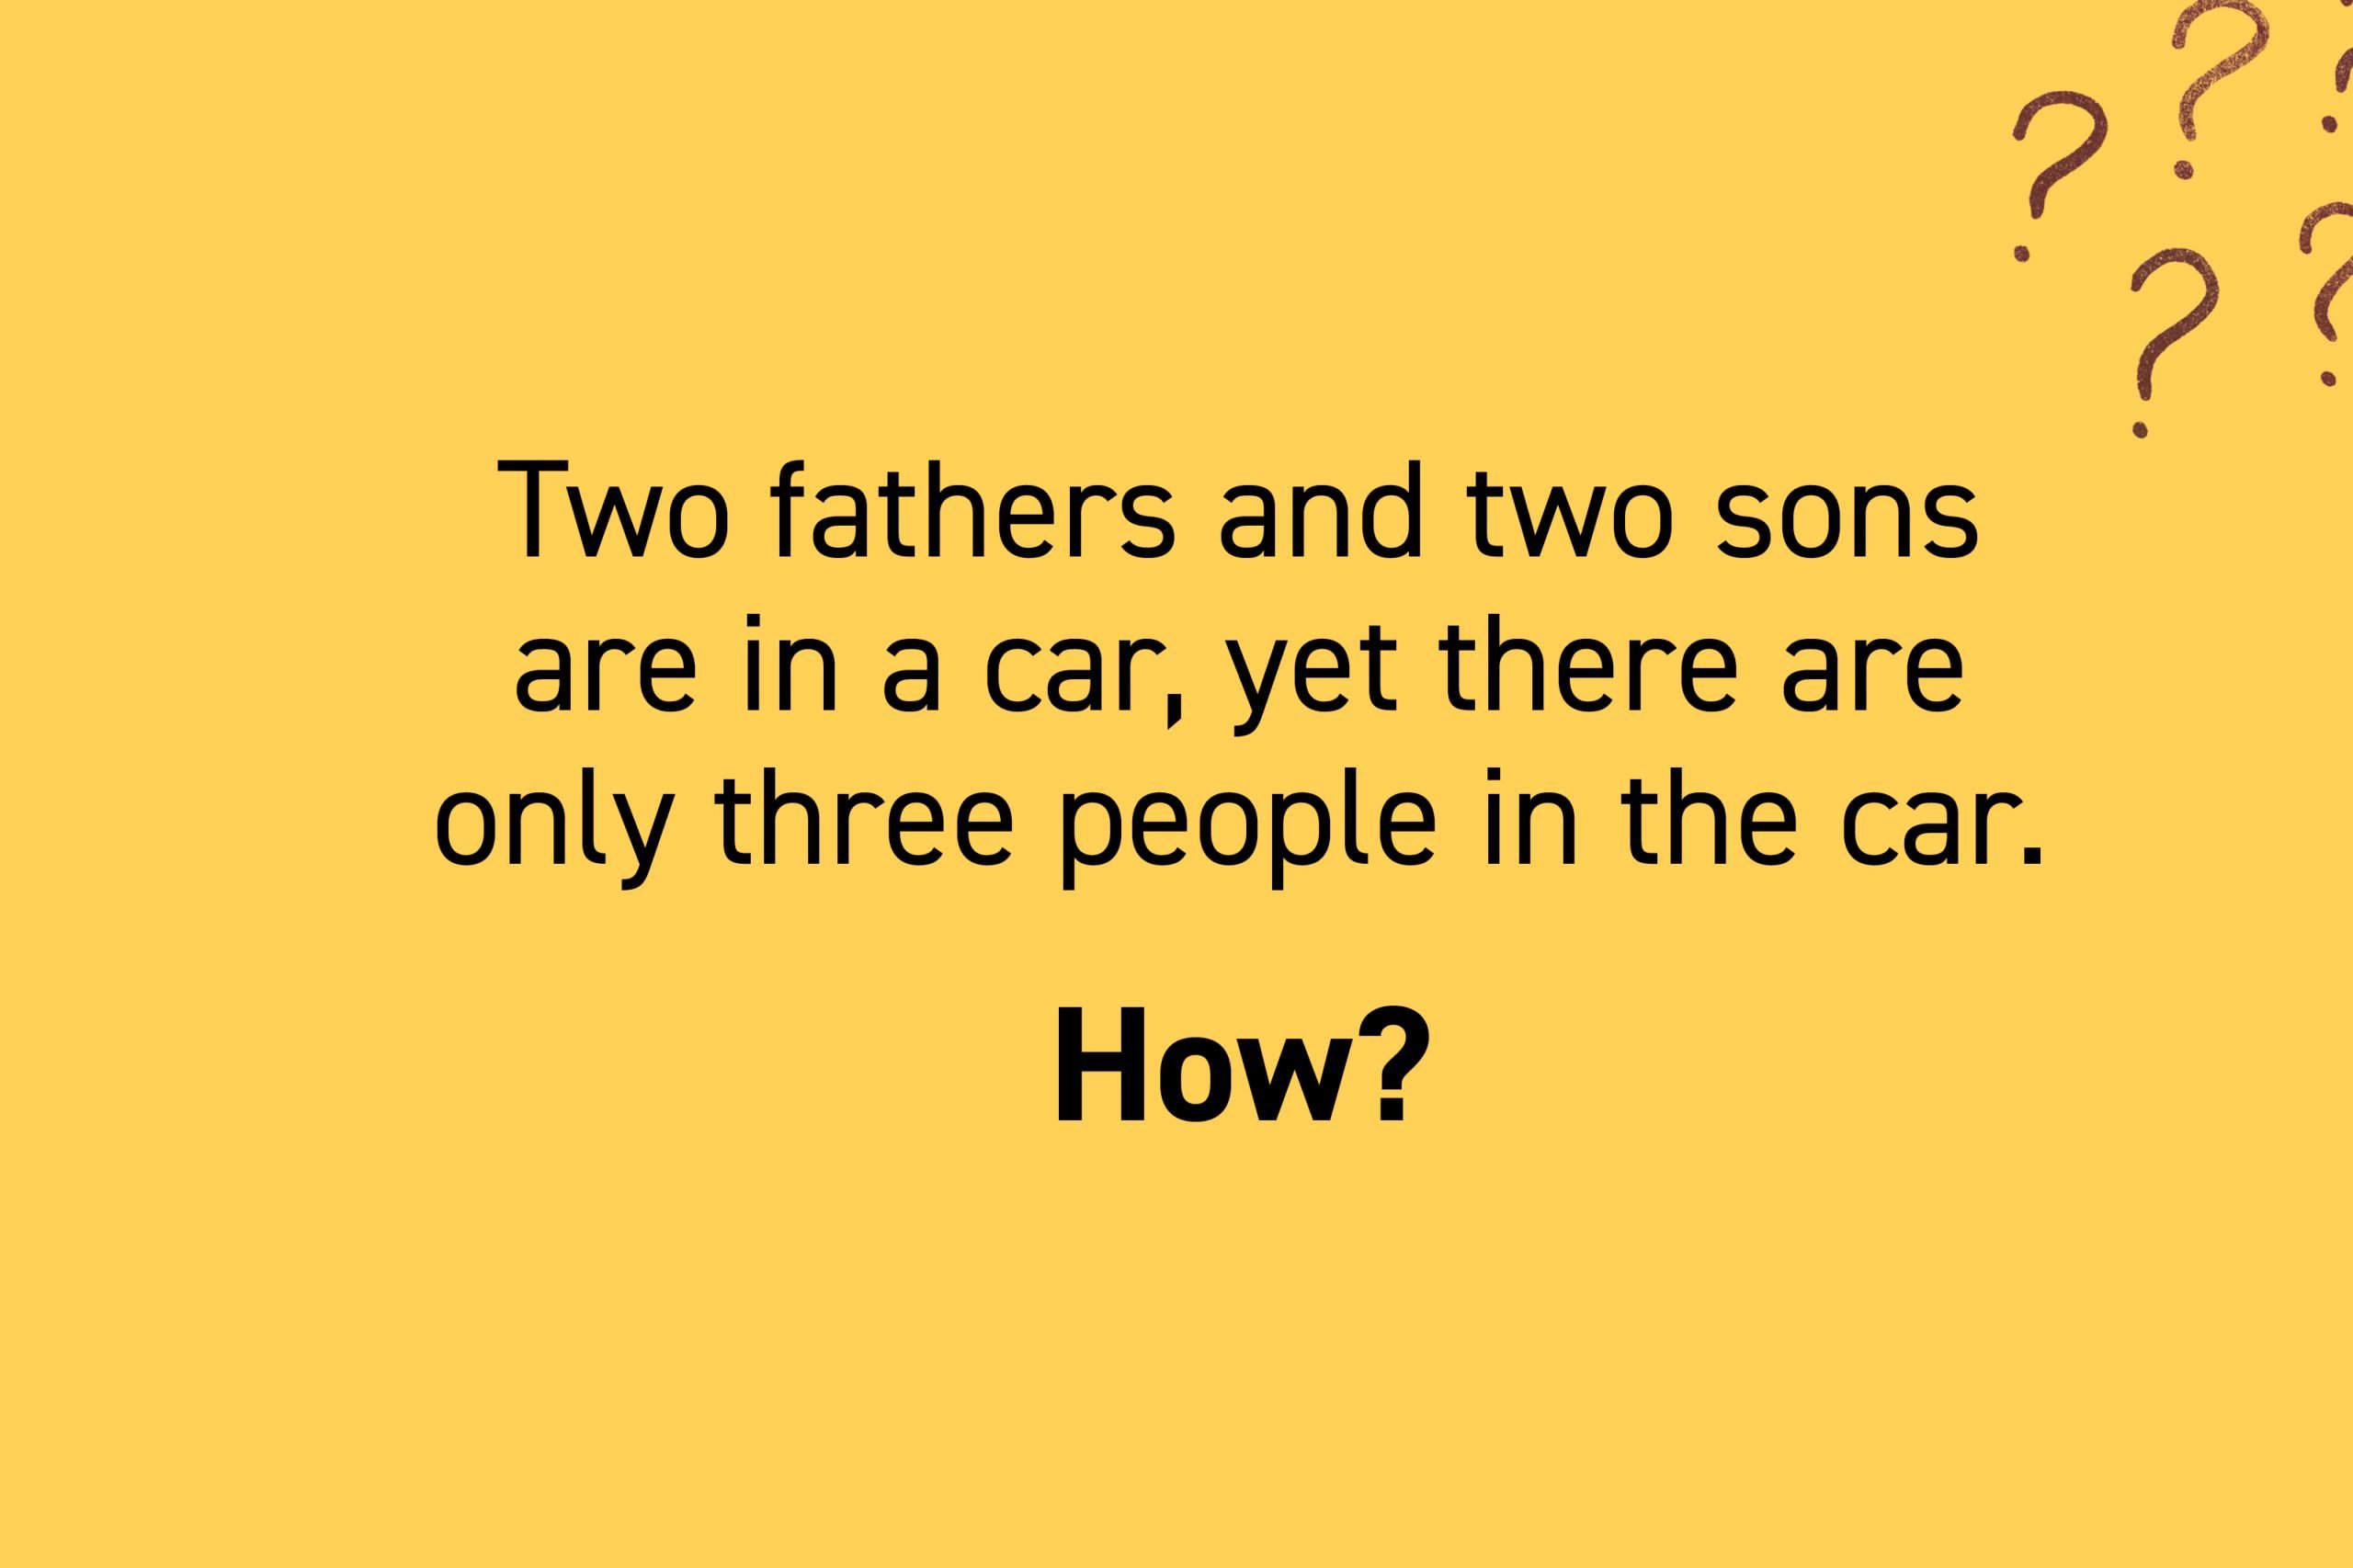 Two fathers and two sons are in a car, yet there are only three people in the car. How?